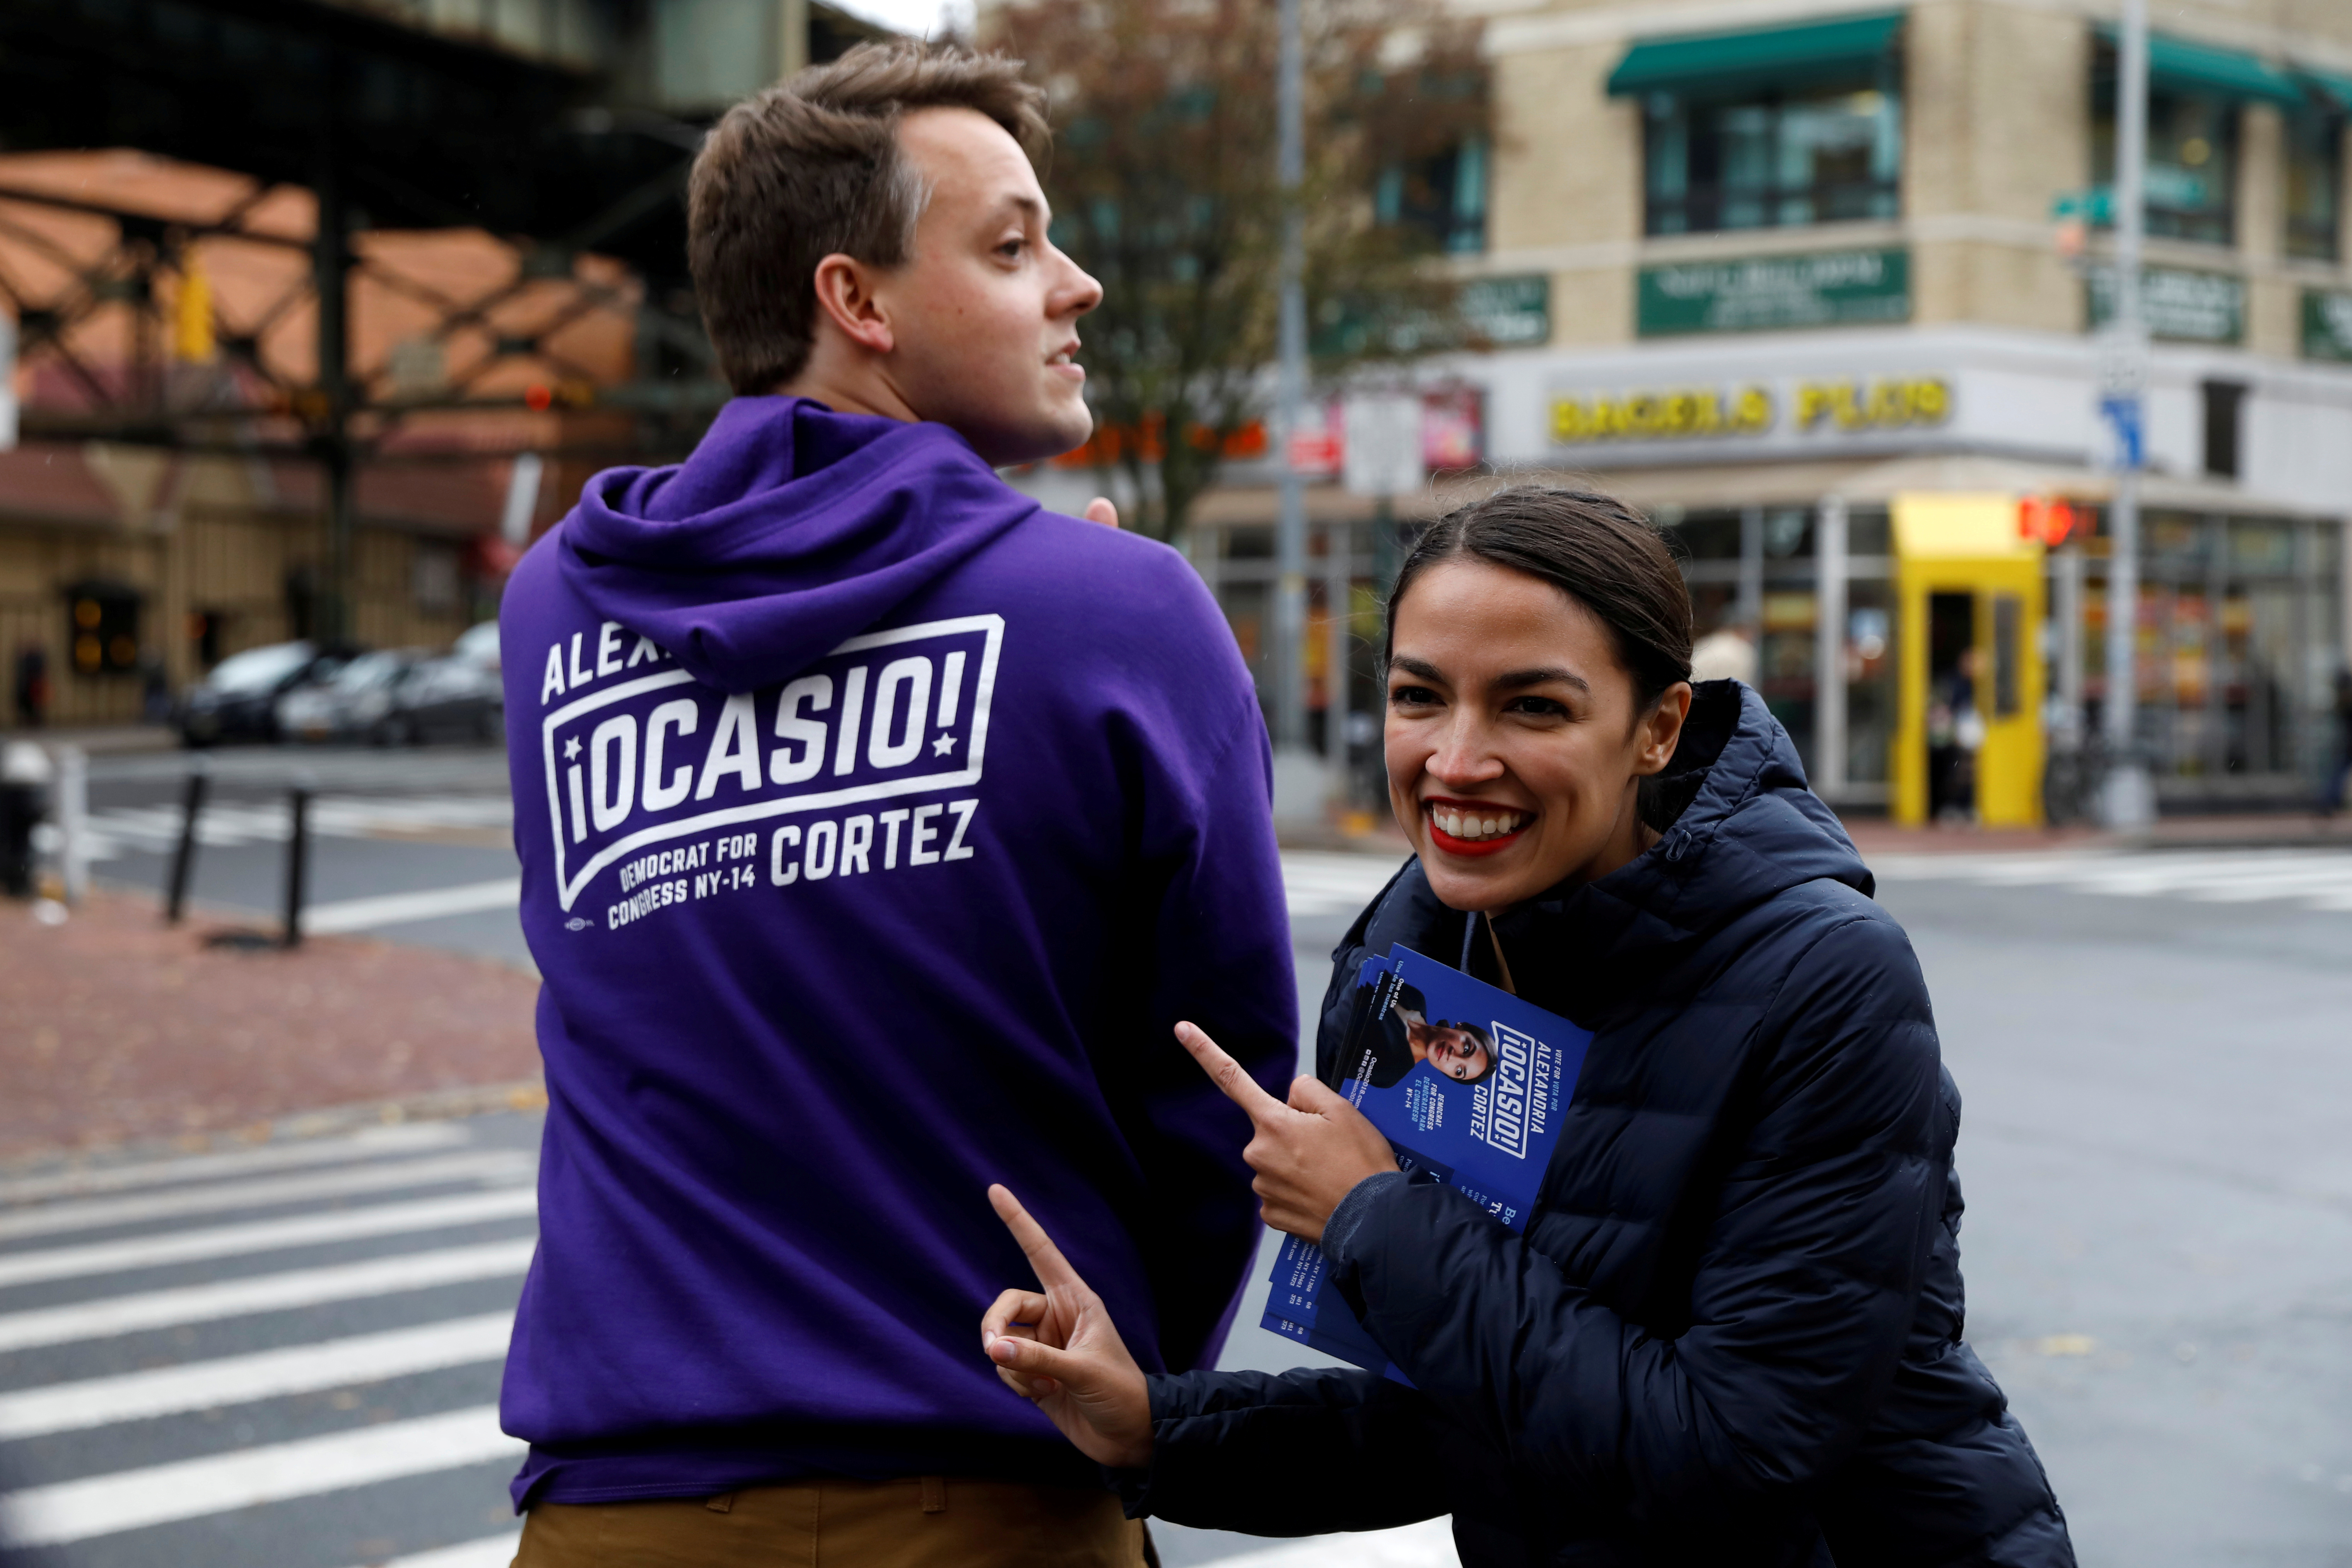 Democratic Congressional candidate Alexandria Ocasio-Cortez poses with a campaign worker during a whistle stop in the Queens borough of New York City